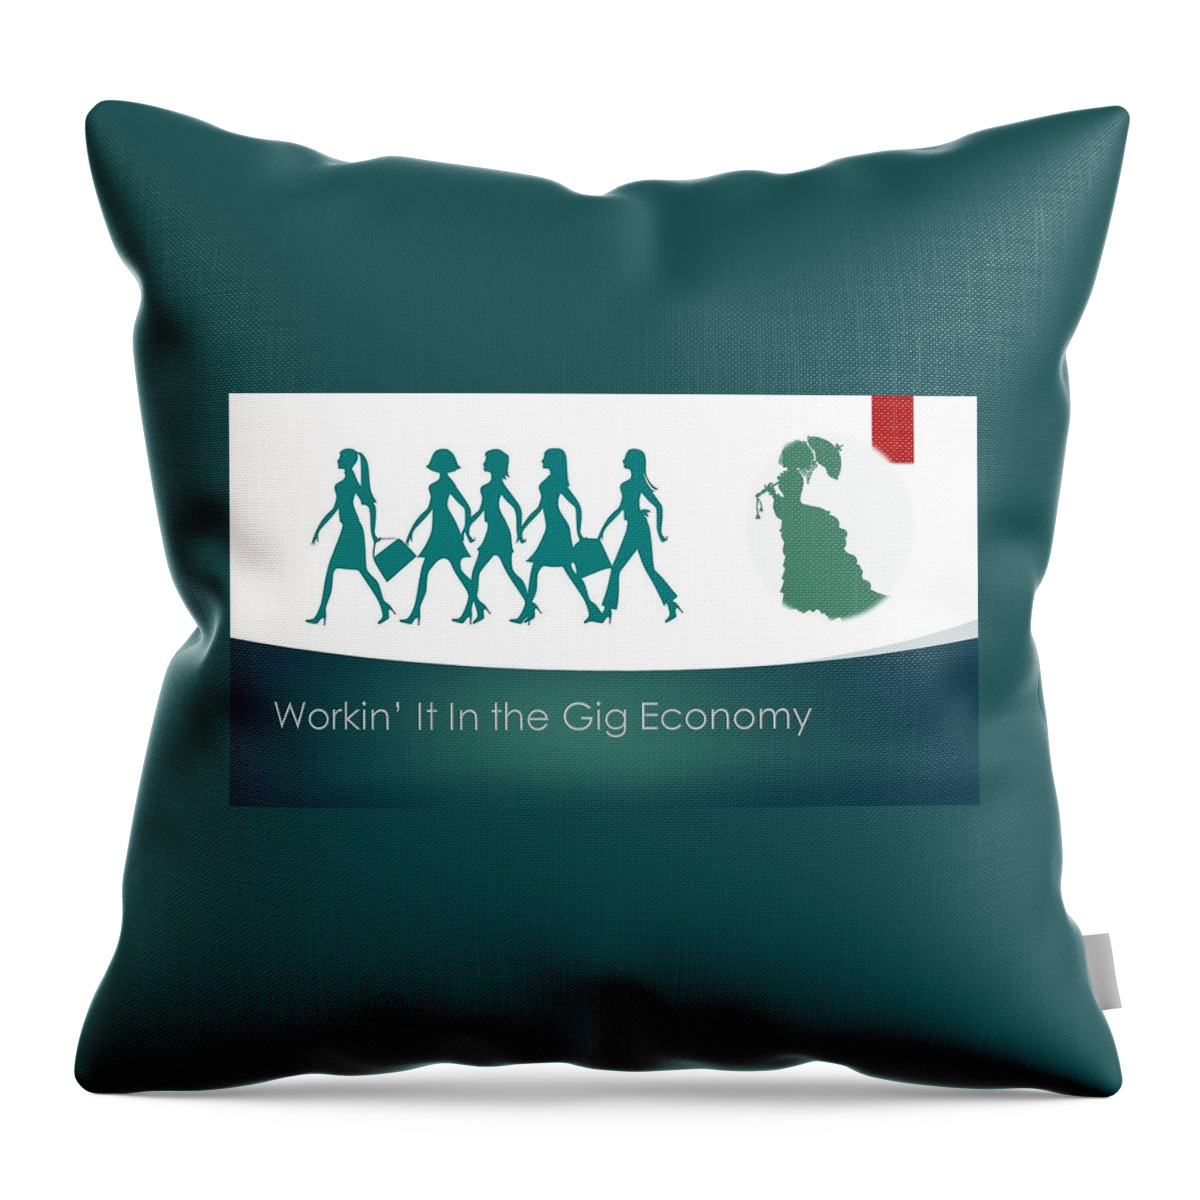 Entrepreneur Throw Pillow featuring the digital art Workin' It in the Gig Economy 3 by Nancy Ayanna Wyatt